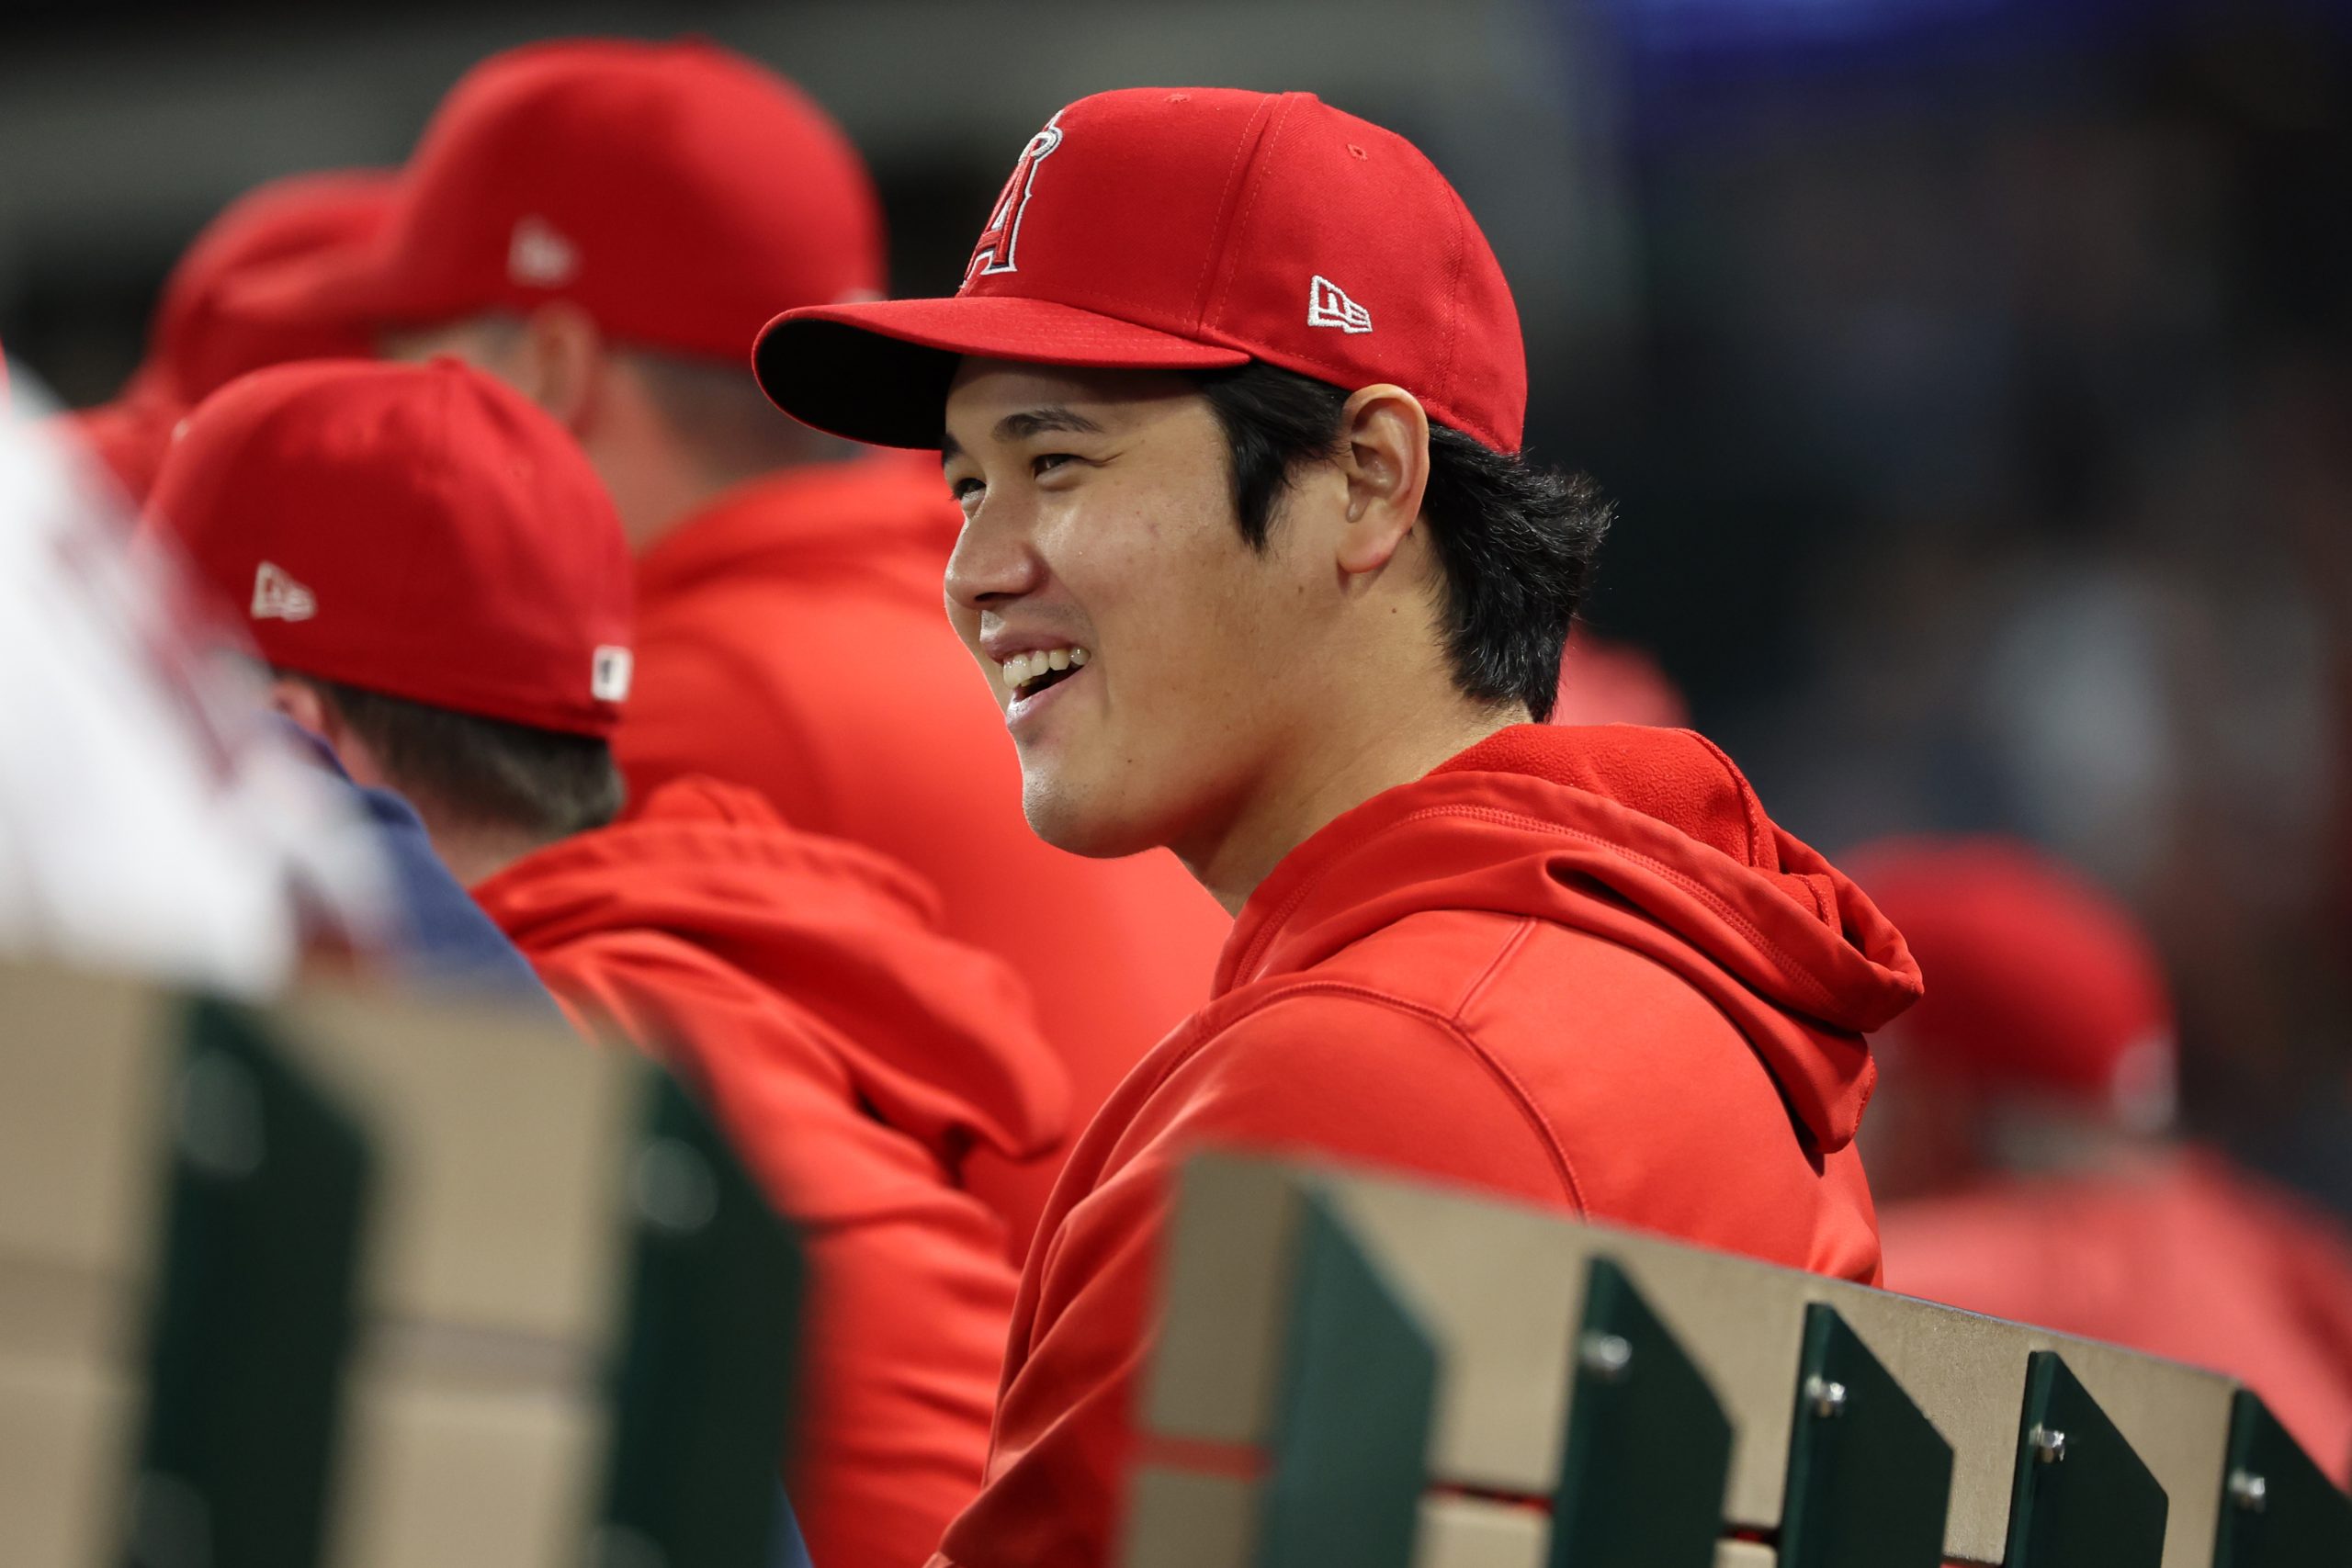 Commenting on Max Scherzer's comments and considering Shohei Ohtani, The  Mets Pod